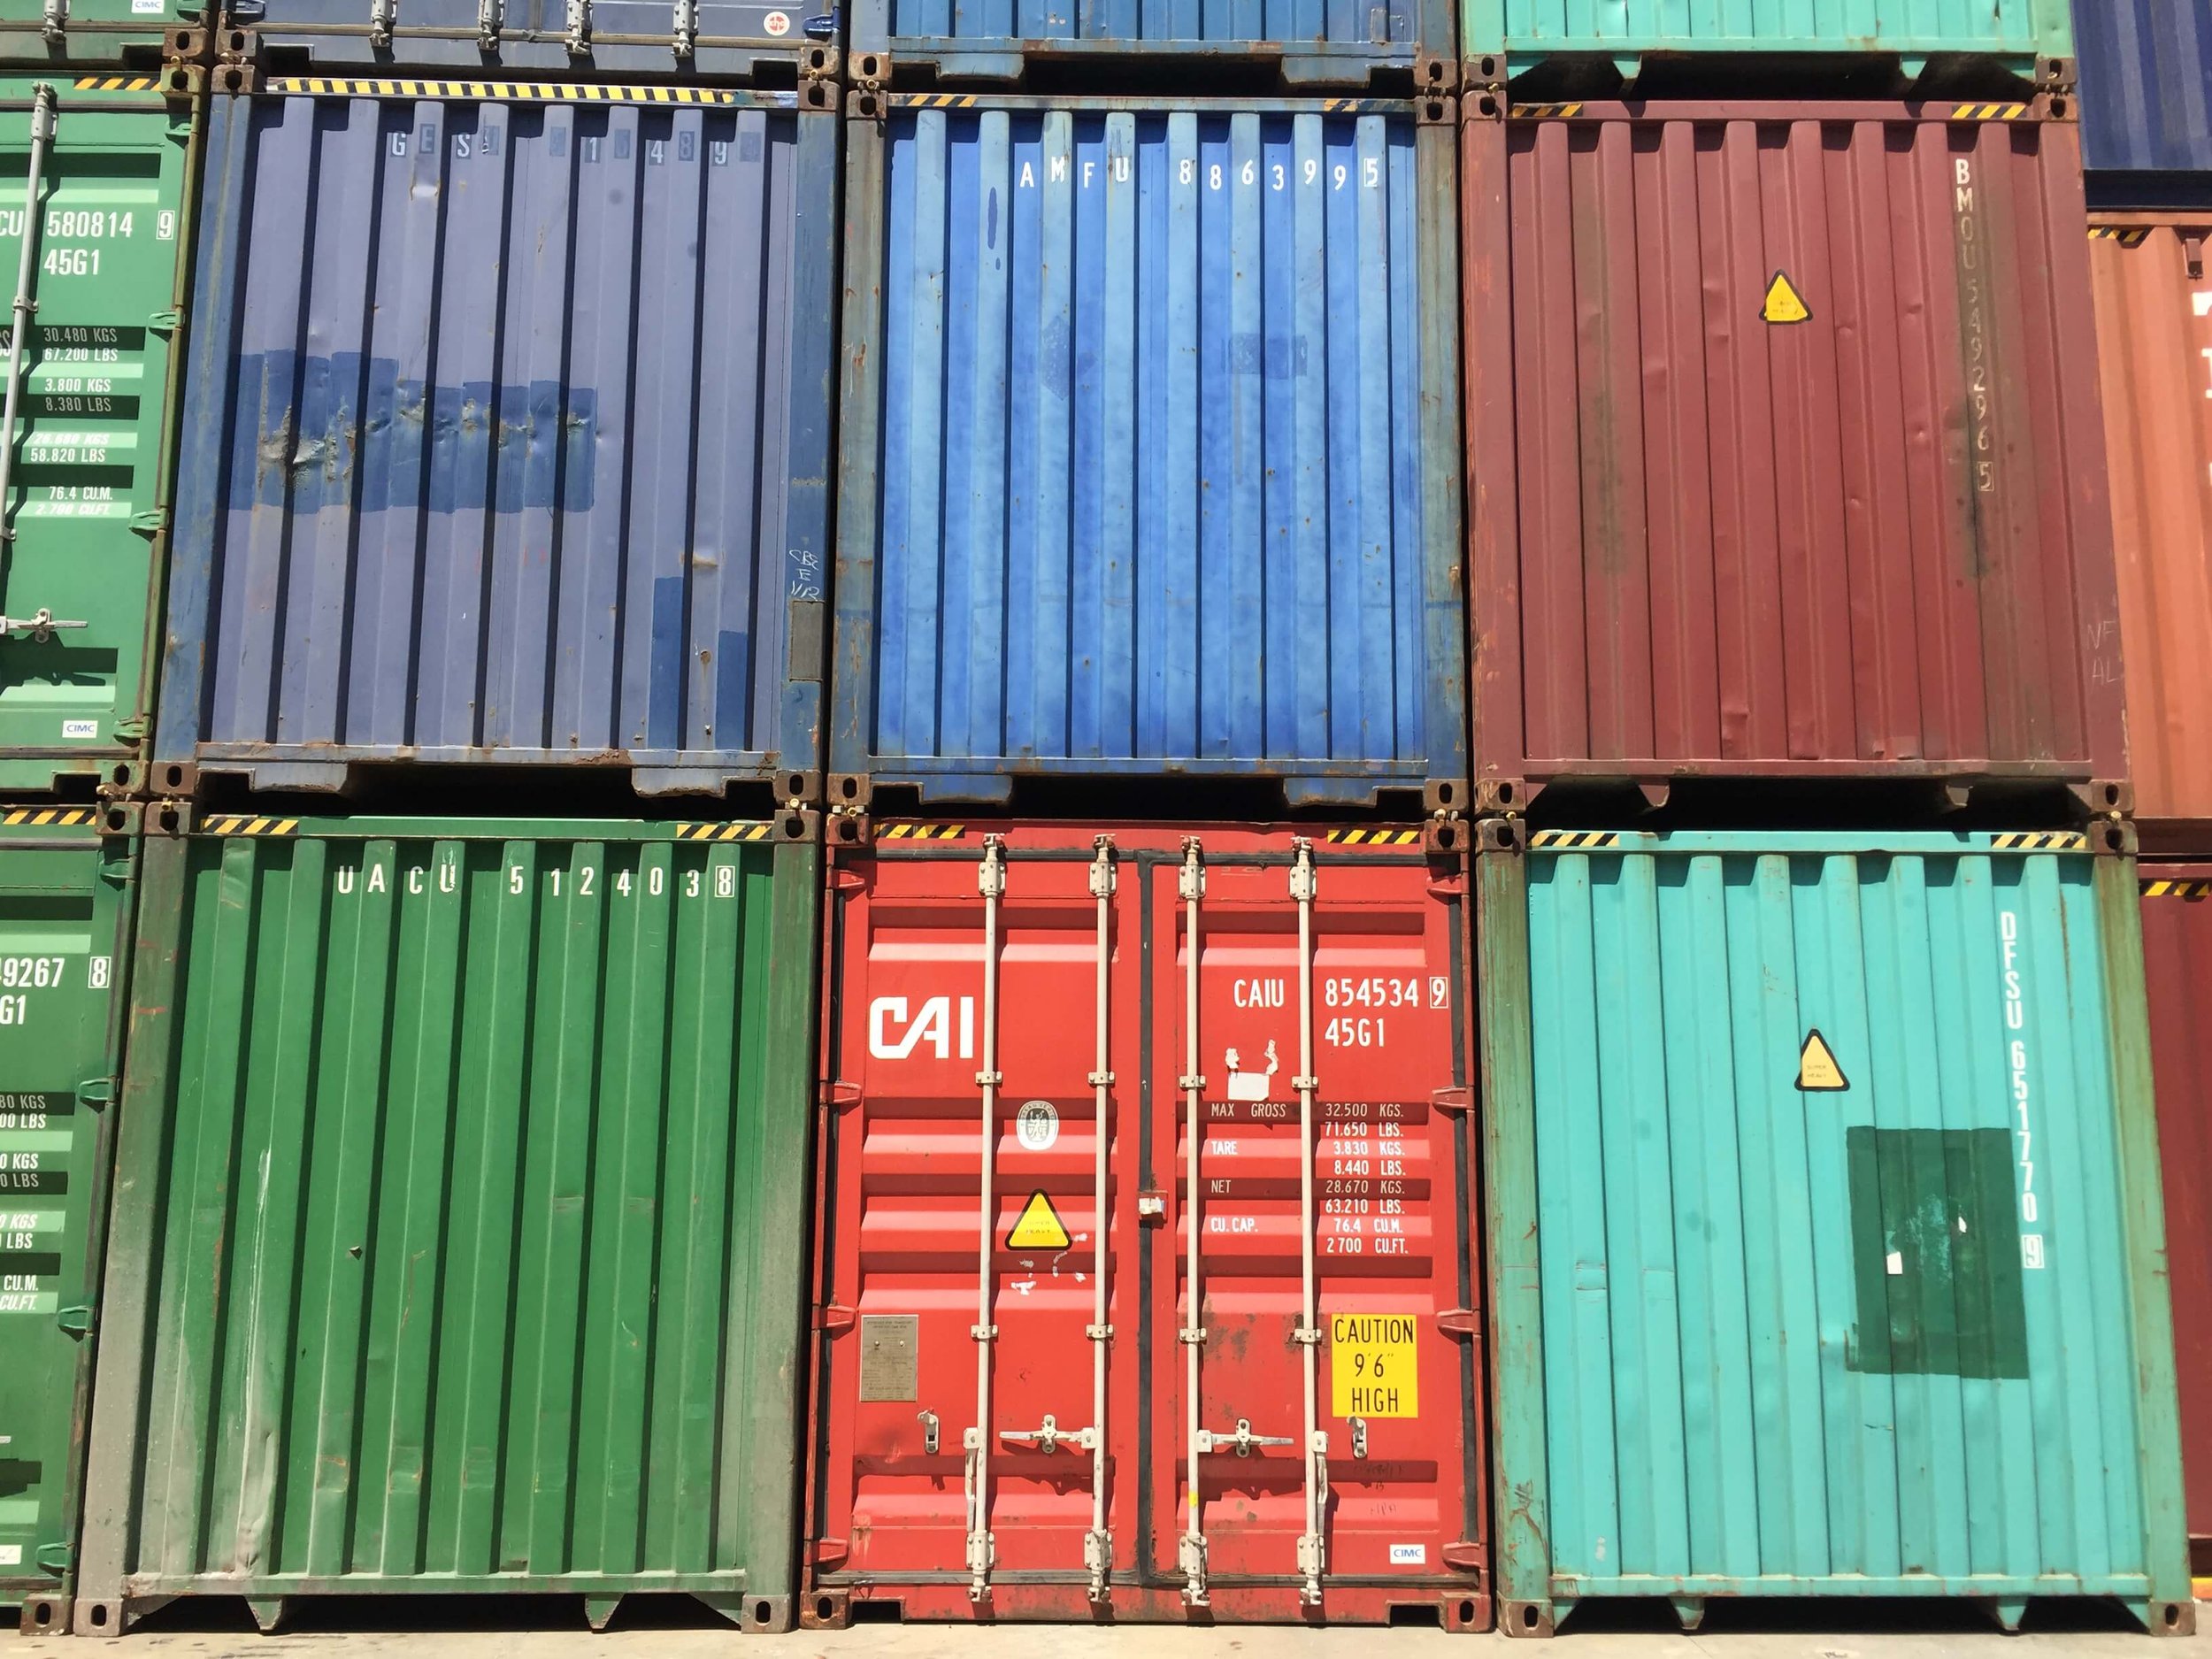  Grid of shipping containers. 